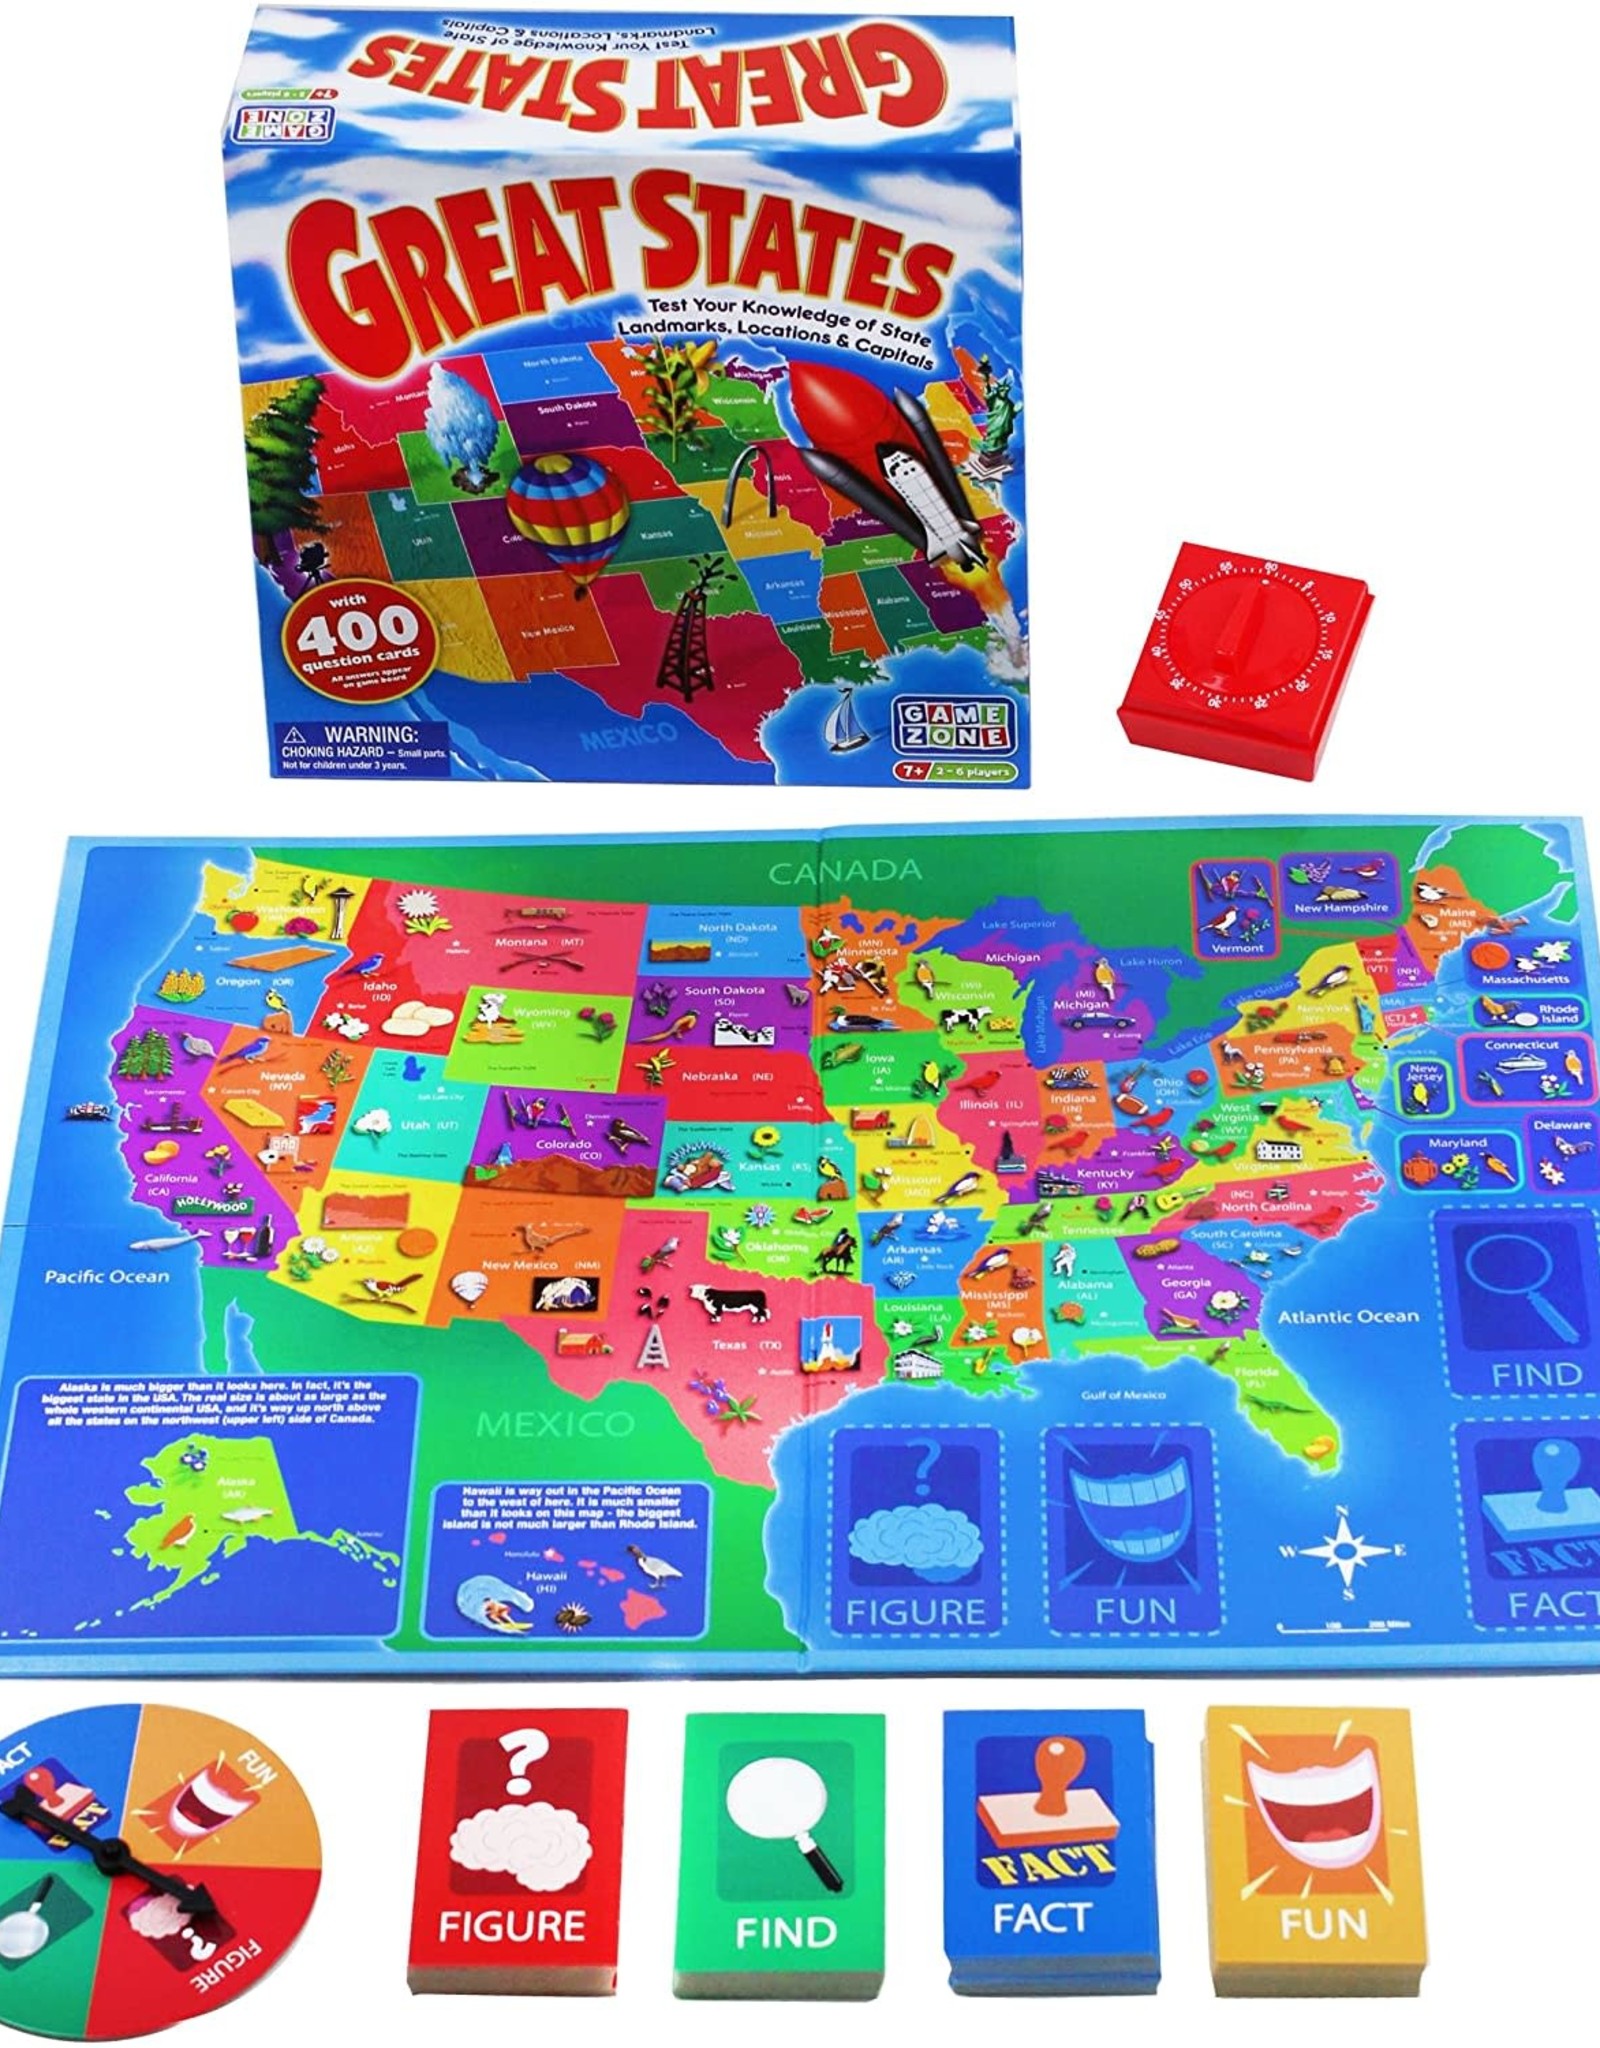 Game of the States, Board Game